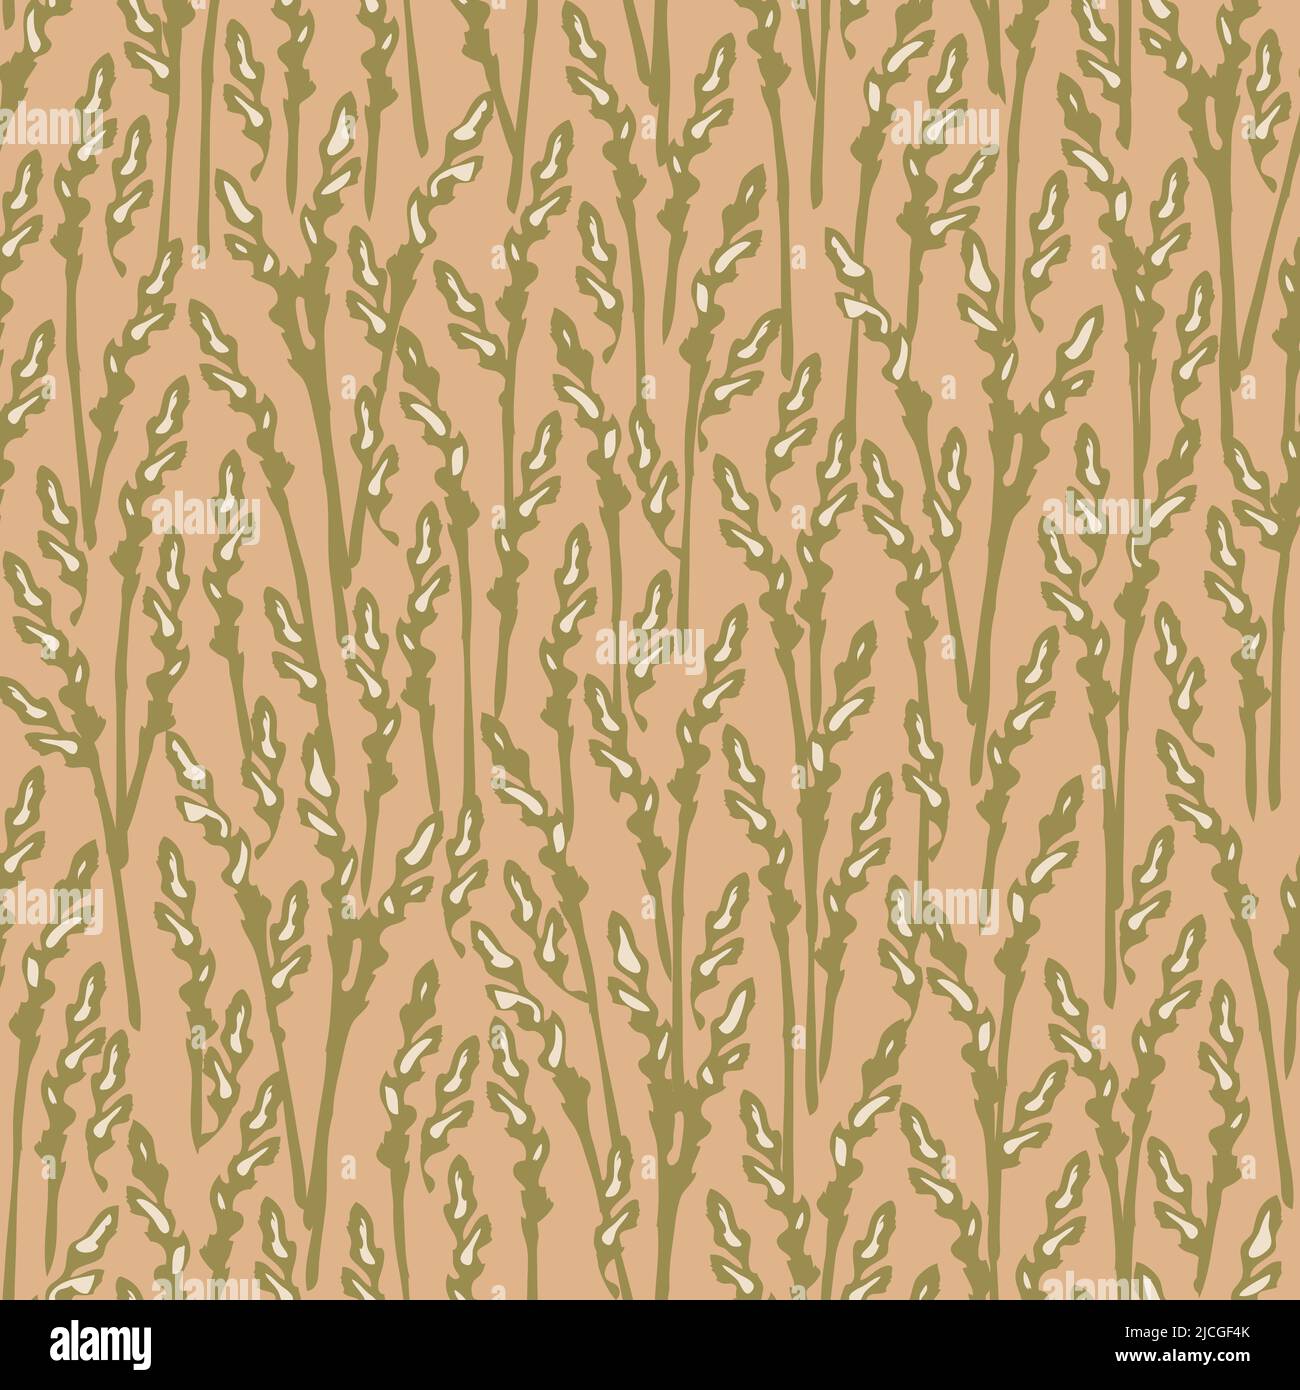 Seamless vector pattern with rye meadow texture on pink background. Decorative grass field wallpaper design. Nature herb fashion textile. Stock Vector